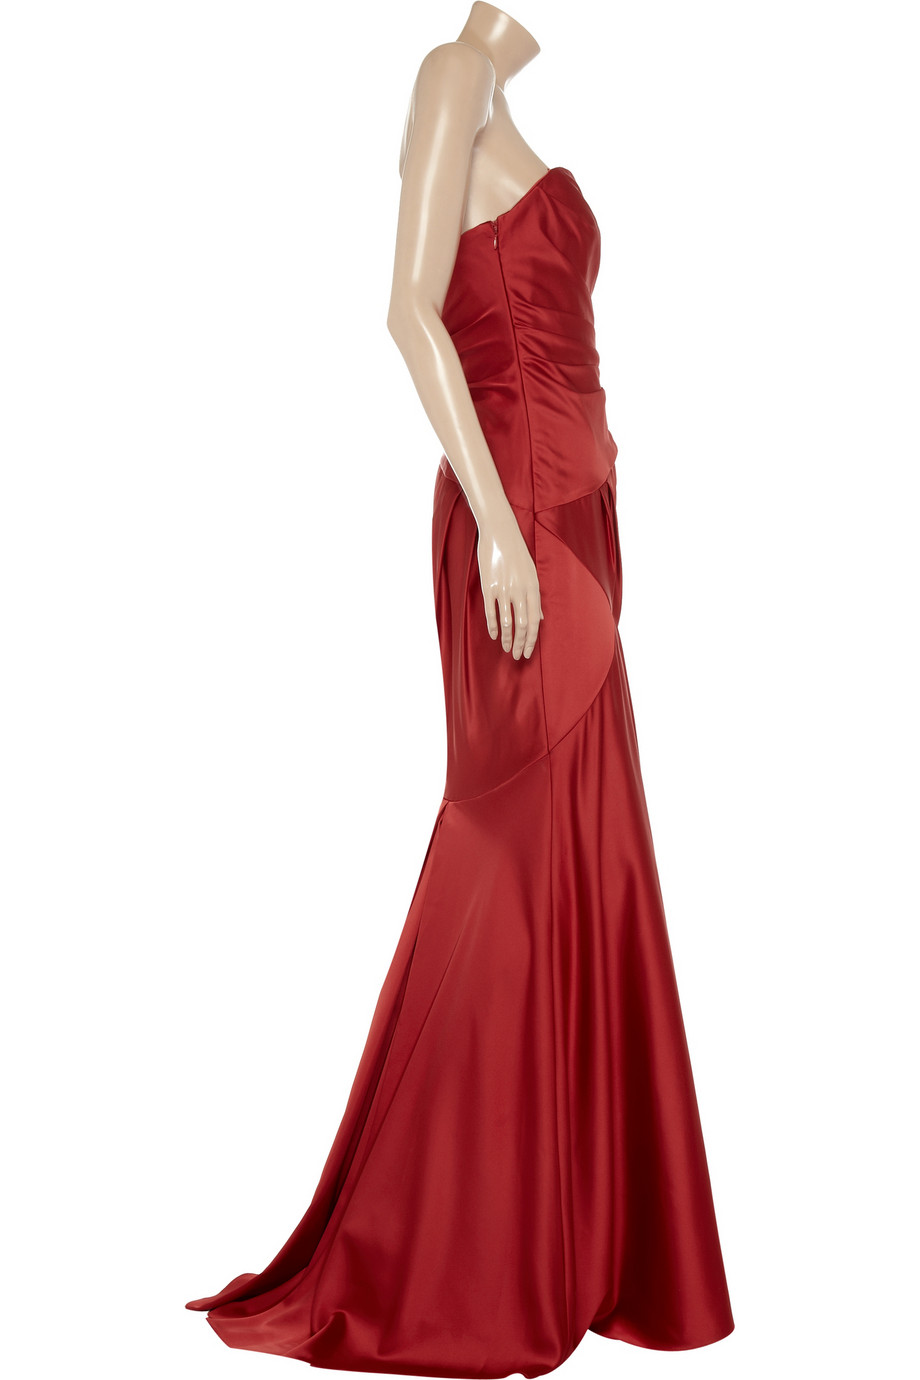 Lyst - Notte By Marchesa Strapless Satin Gown in Red